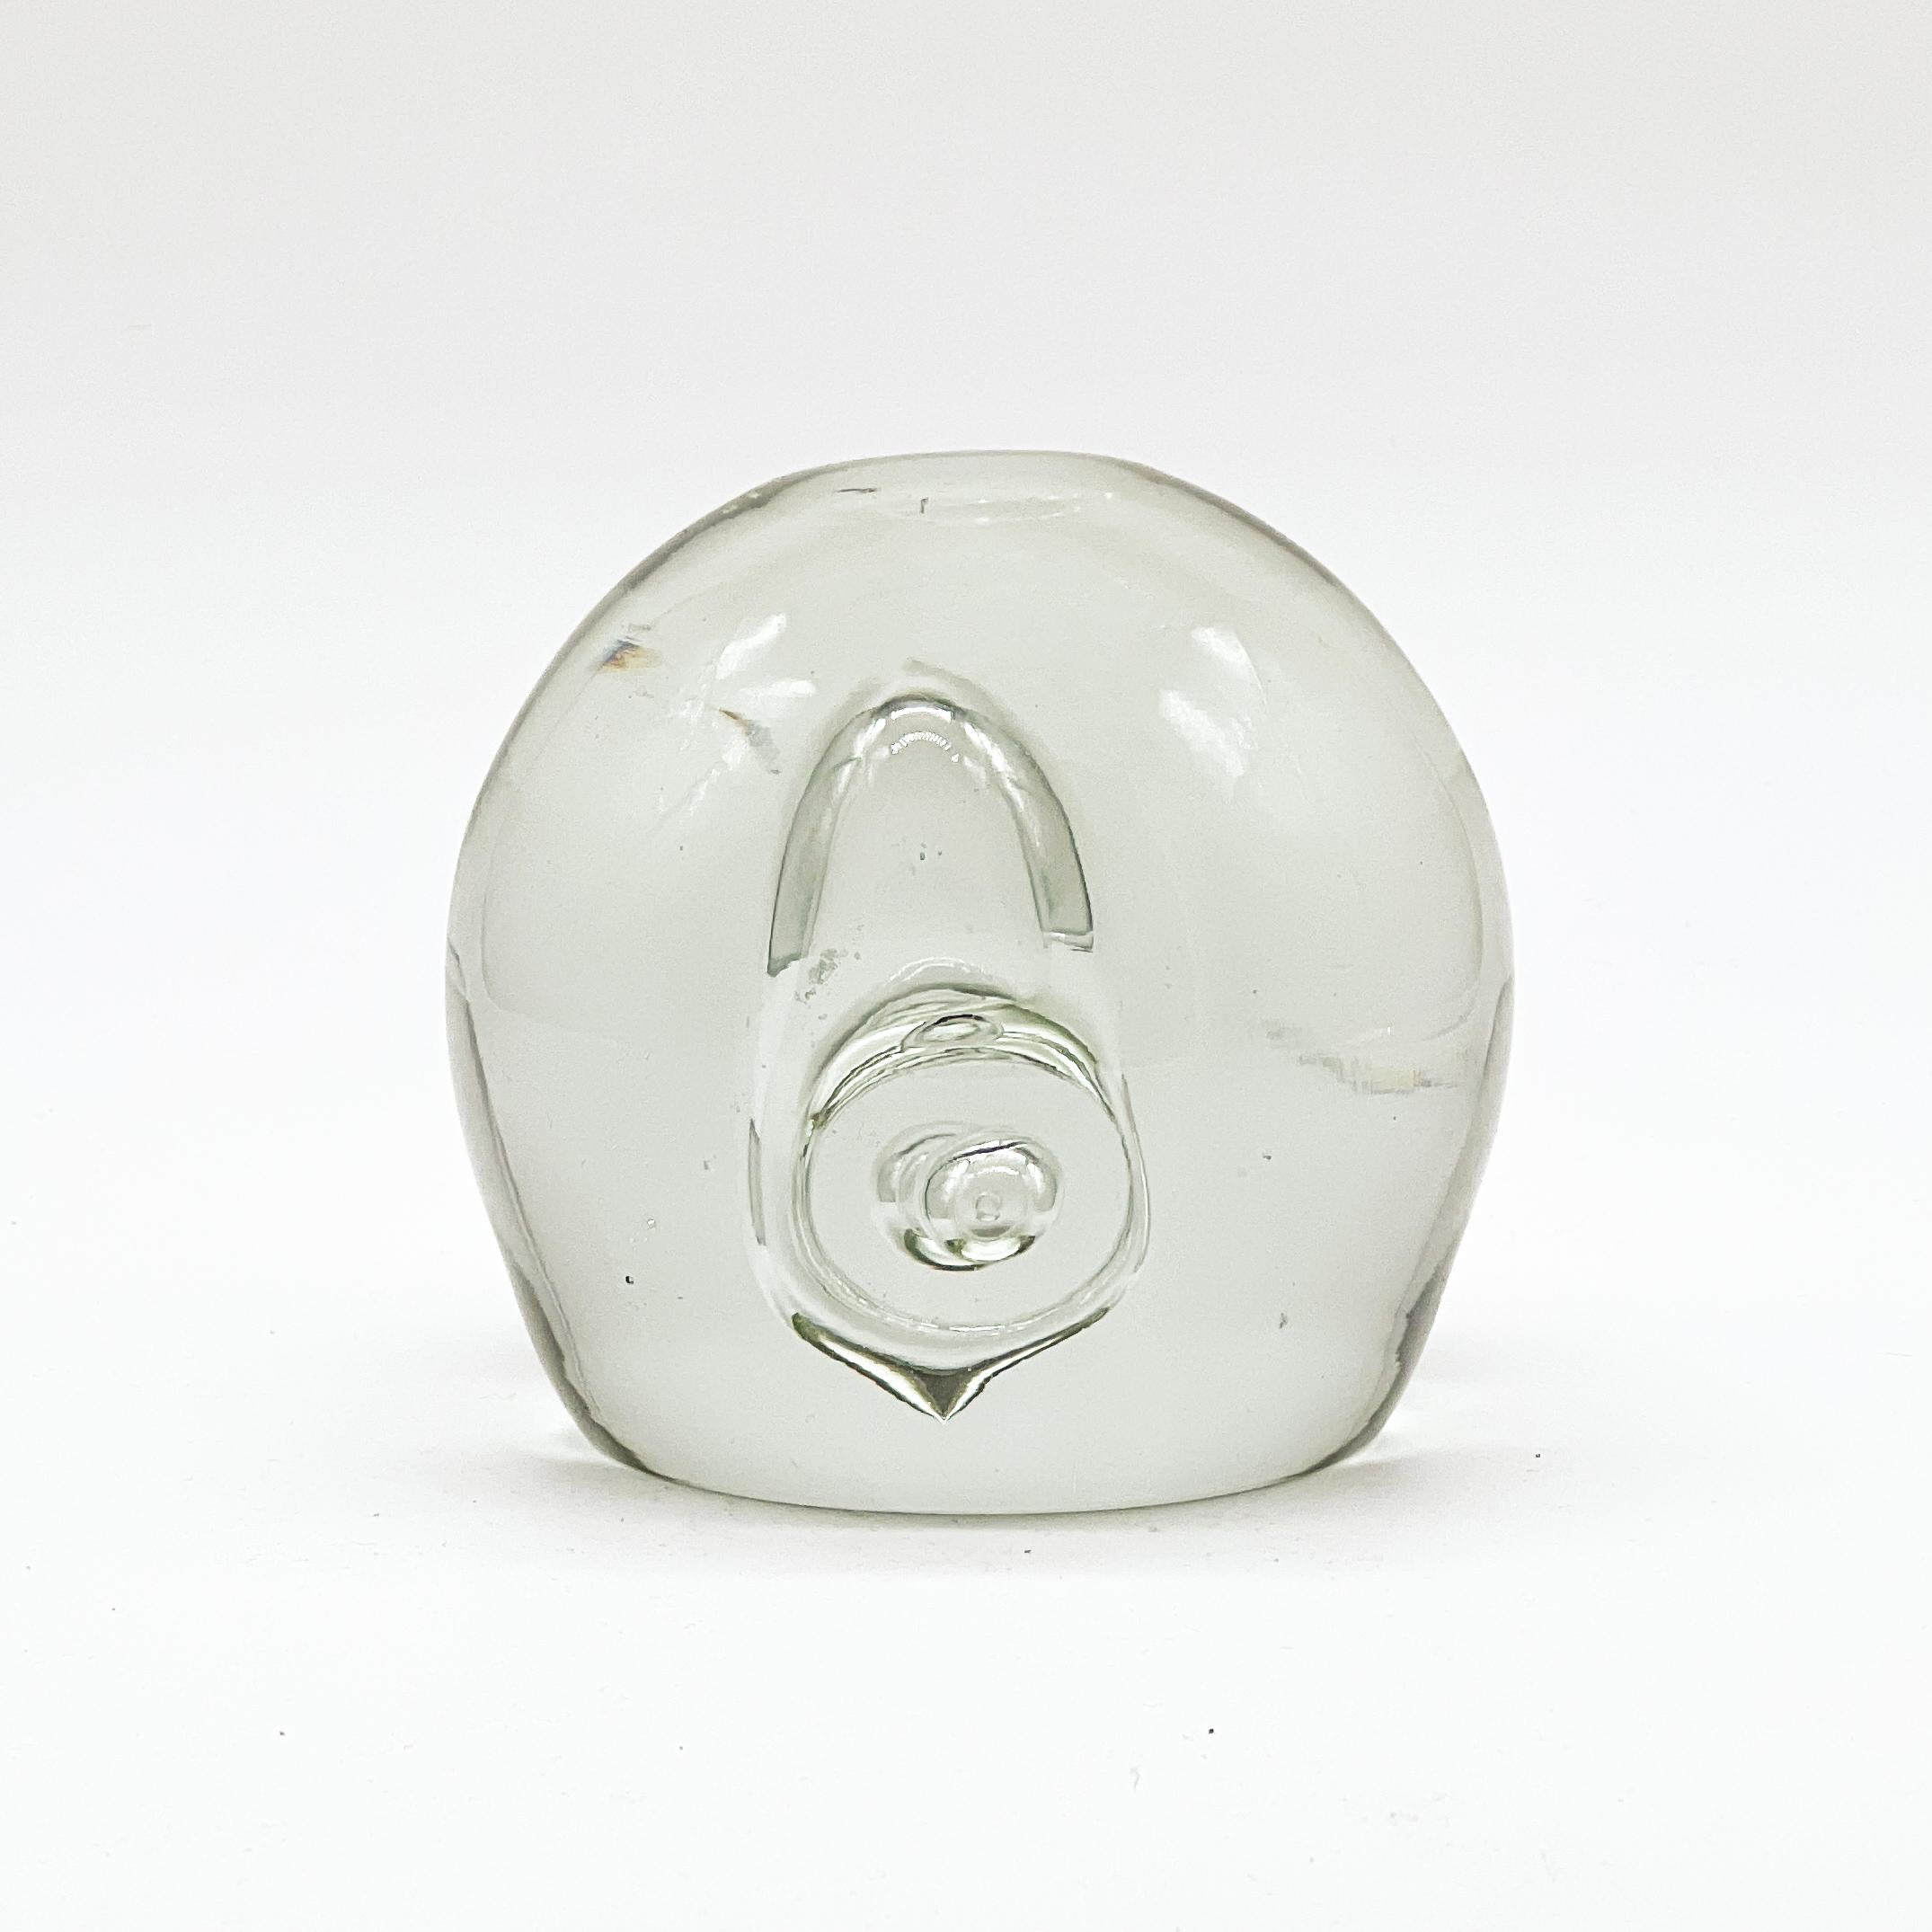 Vintage Clear Murano Glass Paperweight with Included Bubble, Desk Decorative For Sale 2